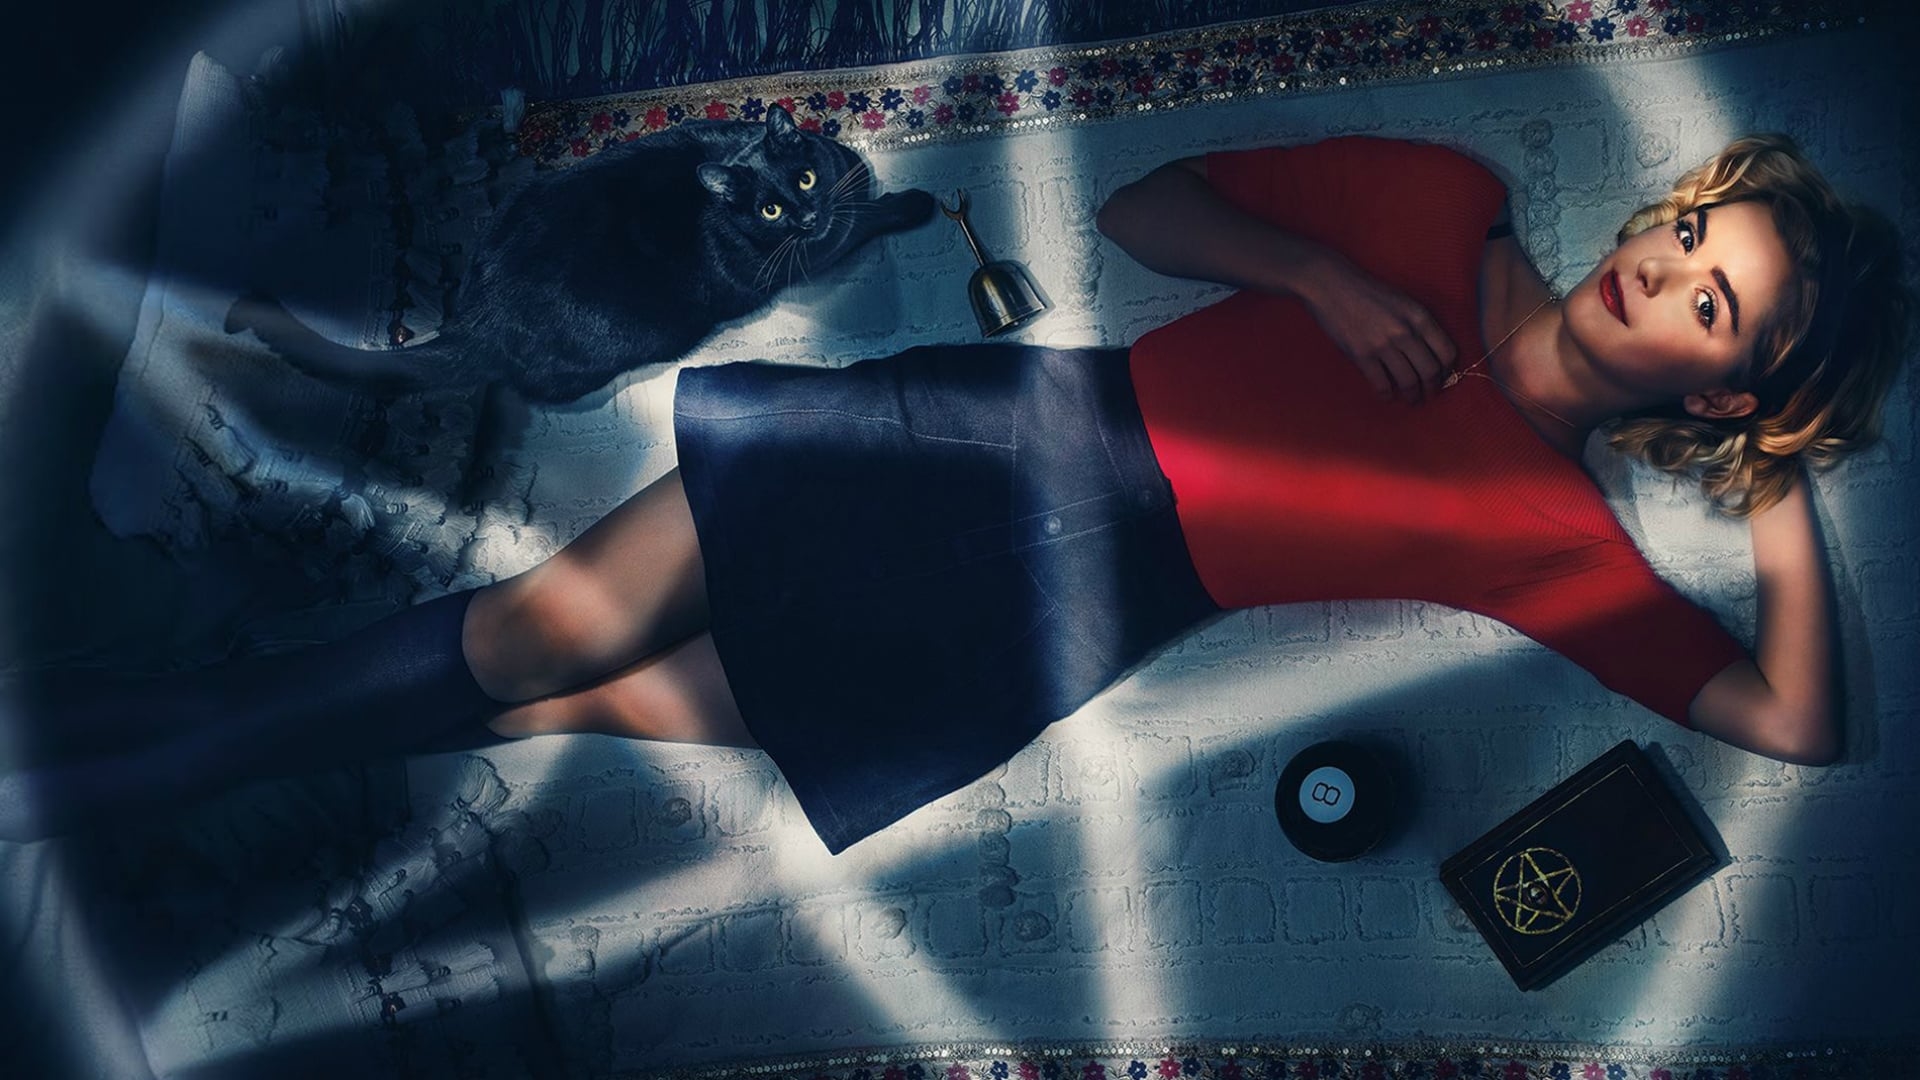 People 1920x1080 Sabrina Spellman cats lying on back looking at viewer blonde black cats red clothing red lipstick TV series Netflix TV Series women celebrity actress legs crossed indoors hands on chest witch women indoors makeup wavy hair Kiernan Shipka Chilling Adventures of Sabrina legs together